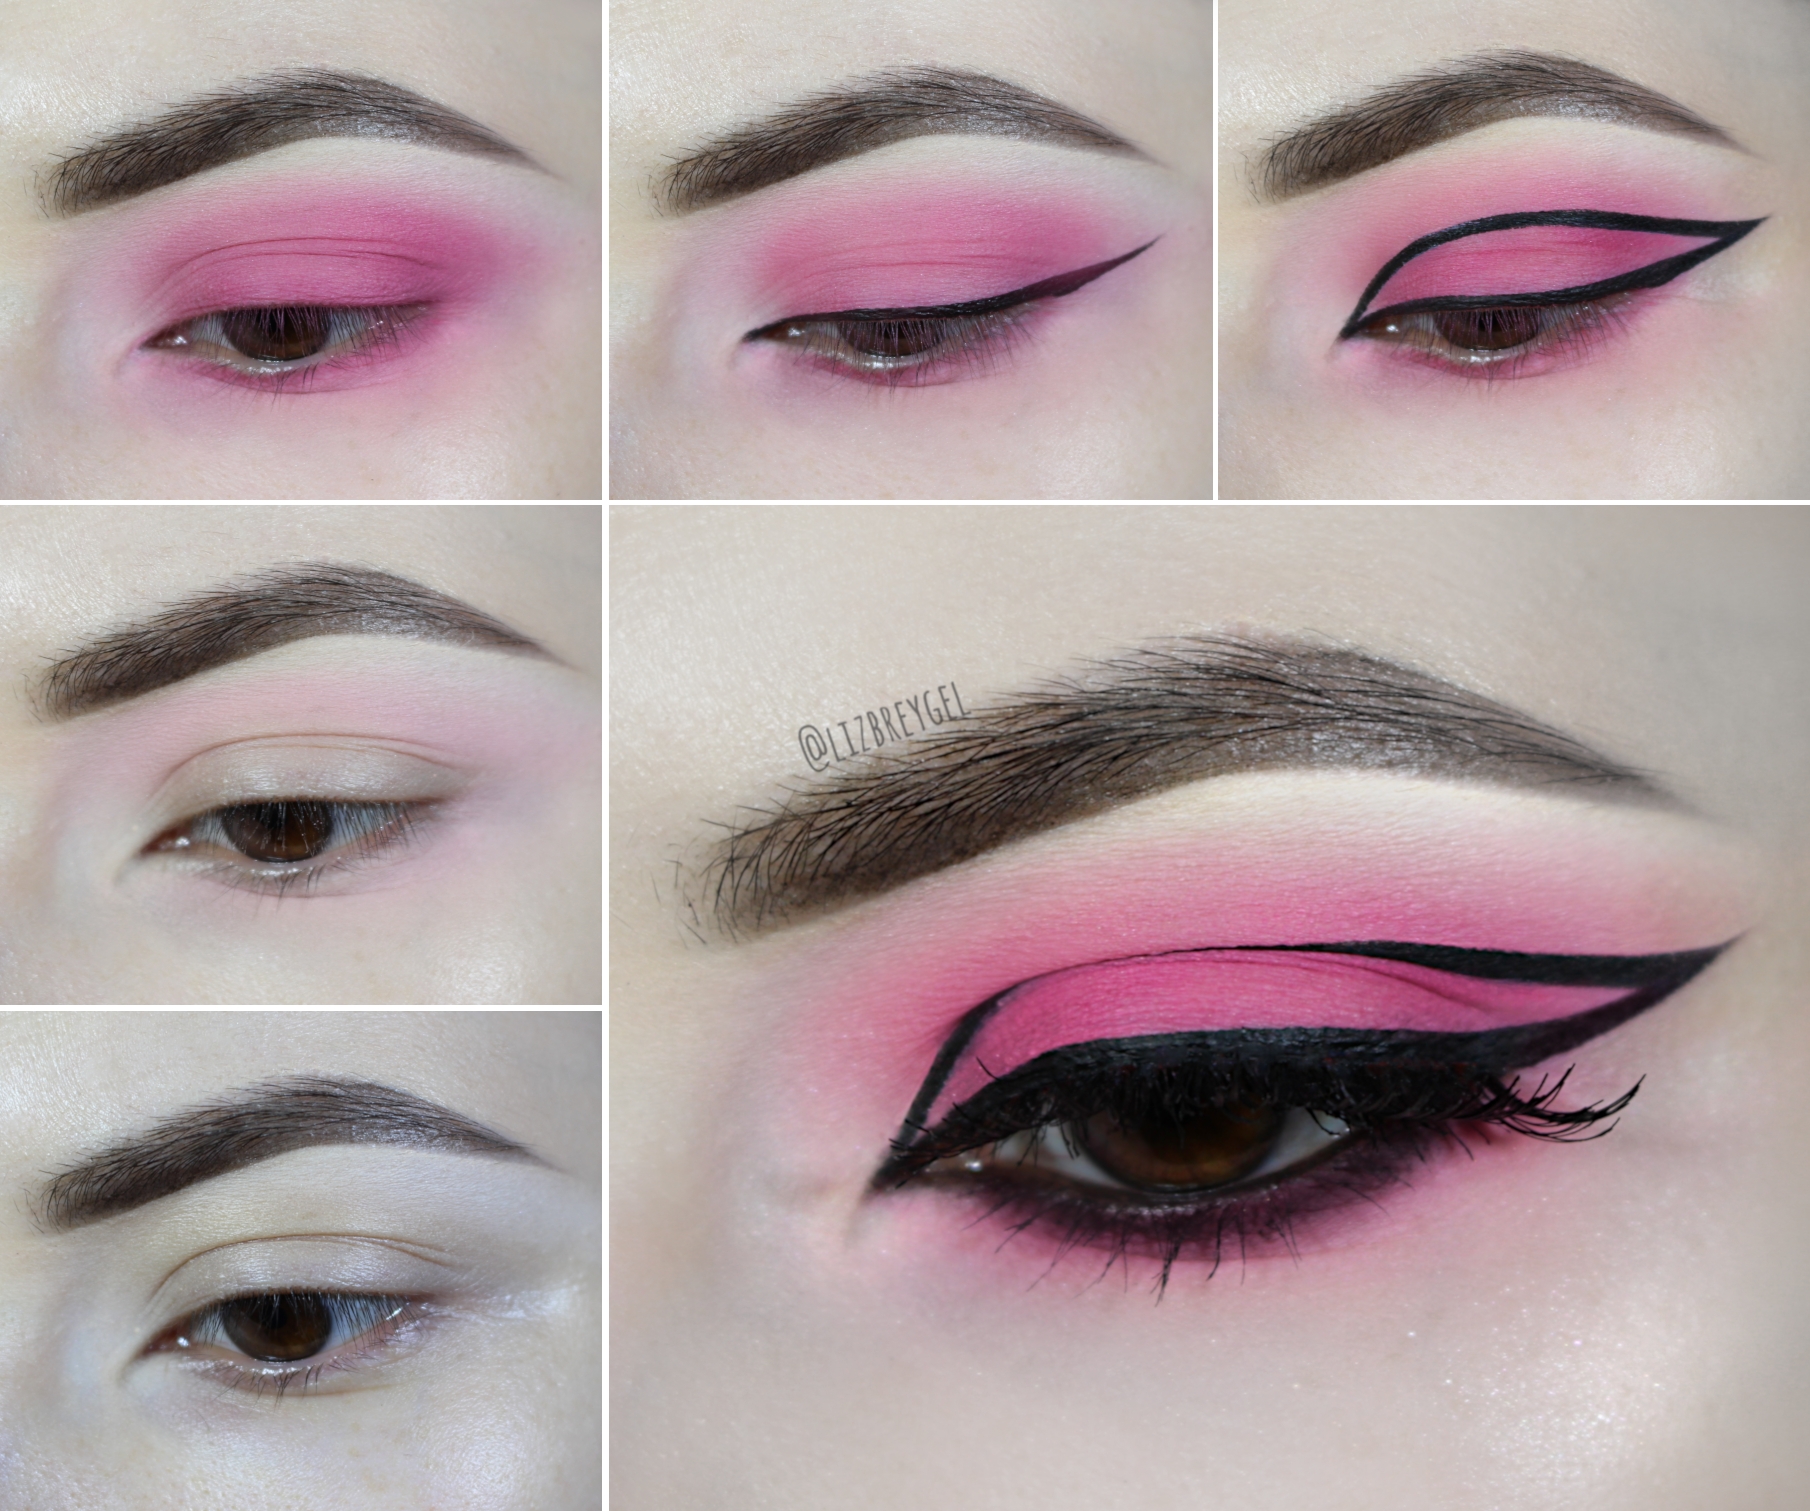 makeup collage showing how to do a pink eyeline rlook for valentines day in steps